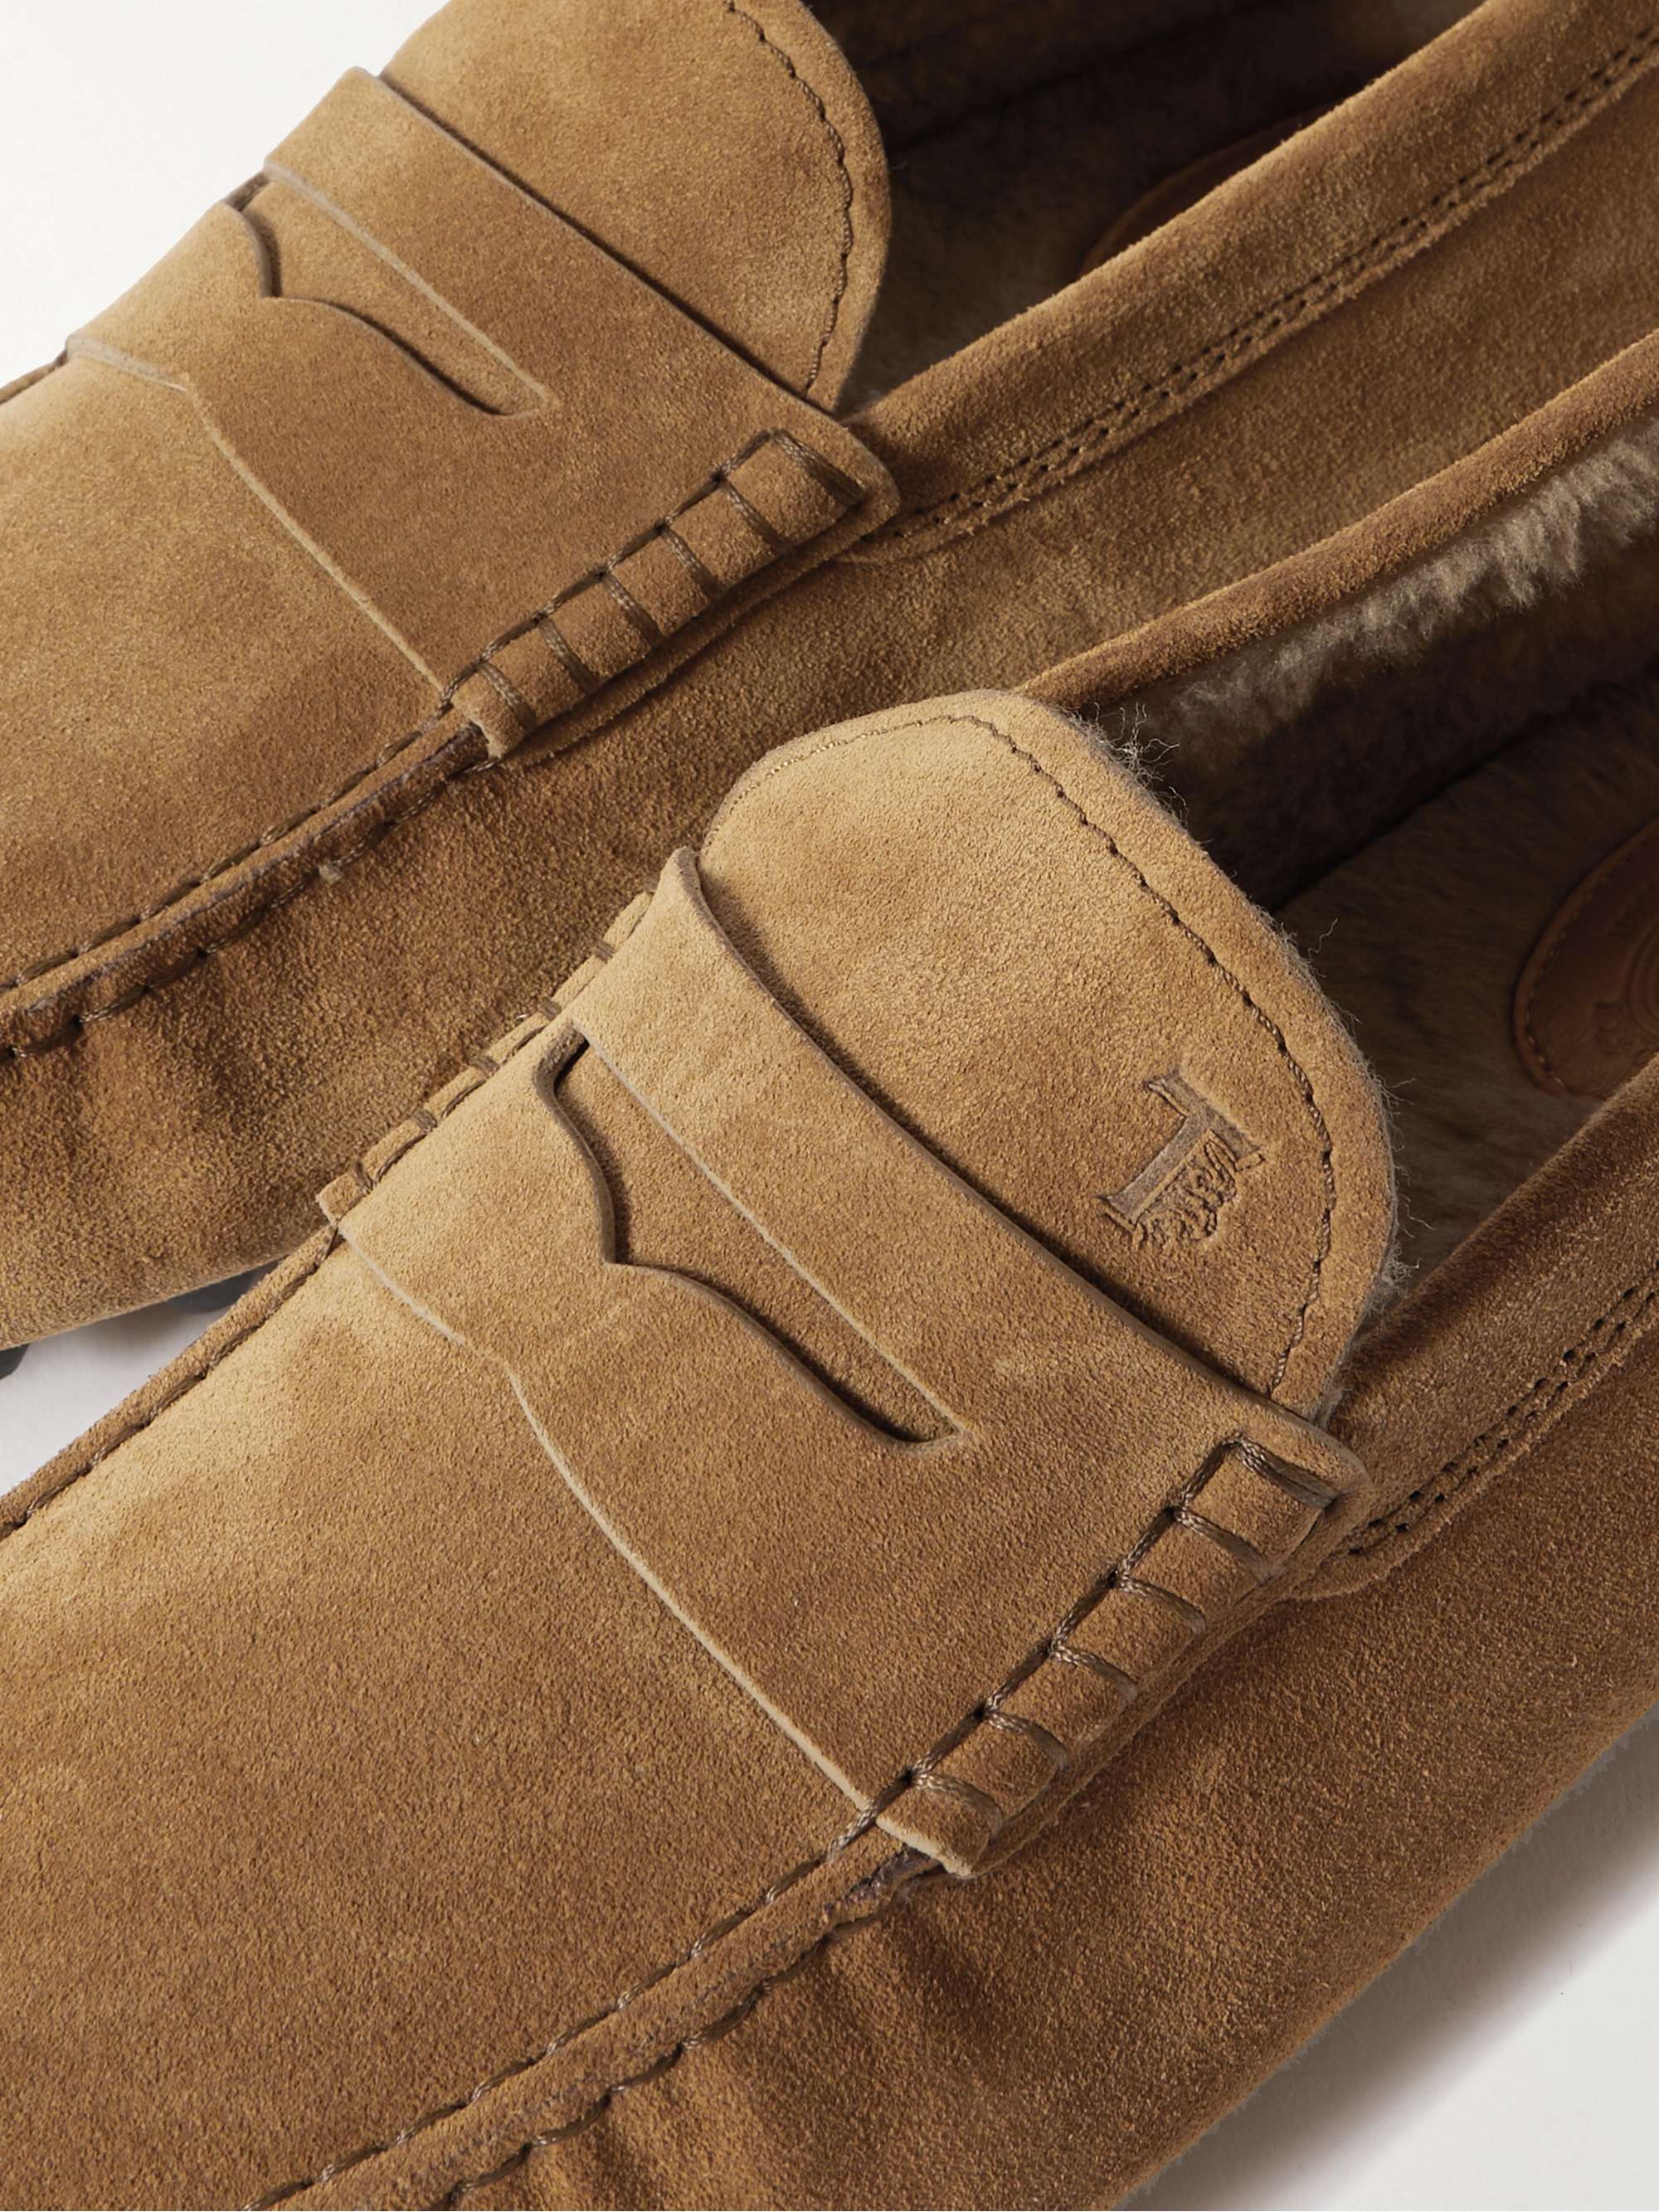 TOD'S Gommino Shearling-Trimmed Suede Driving Shoes